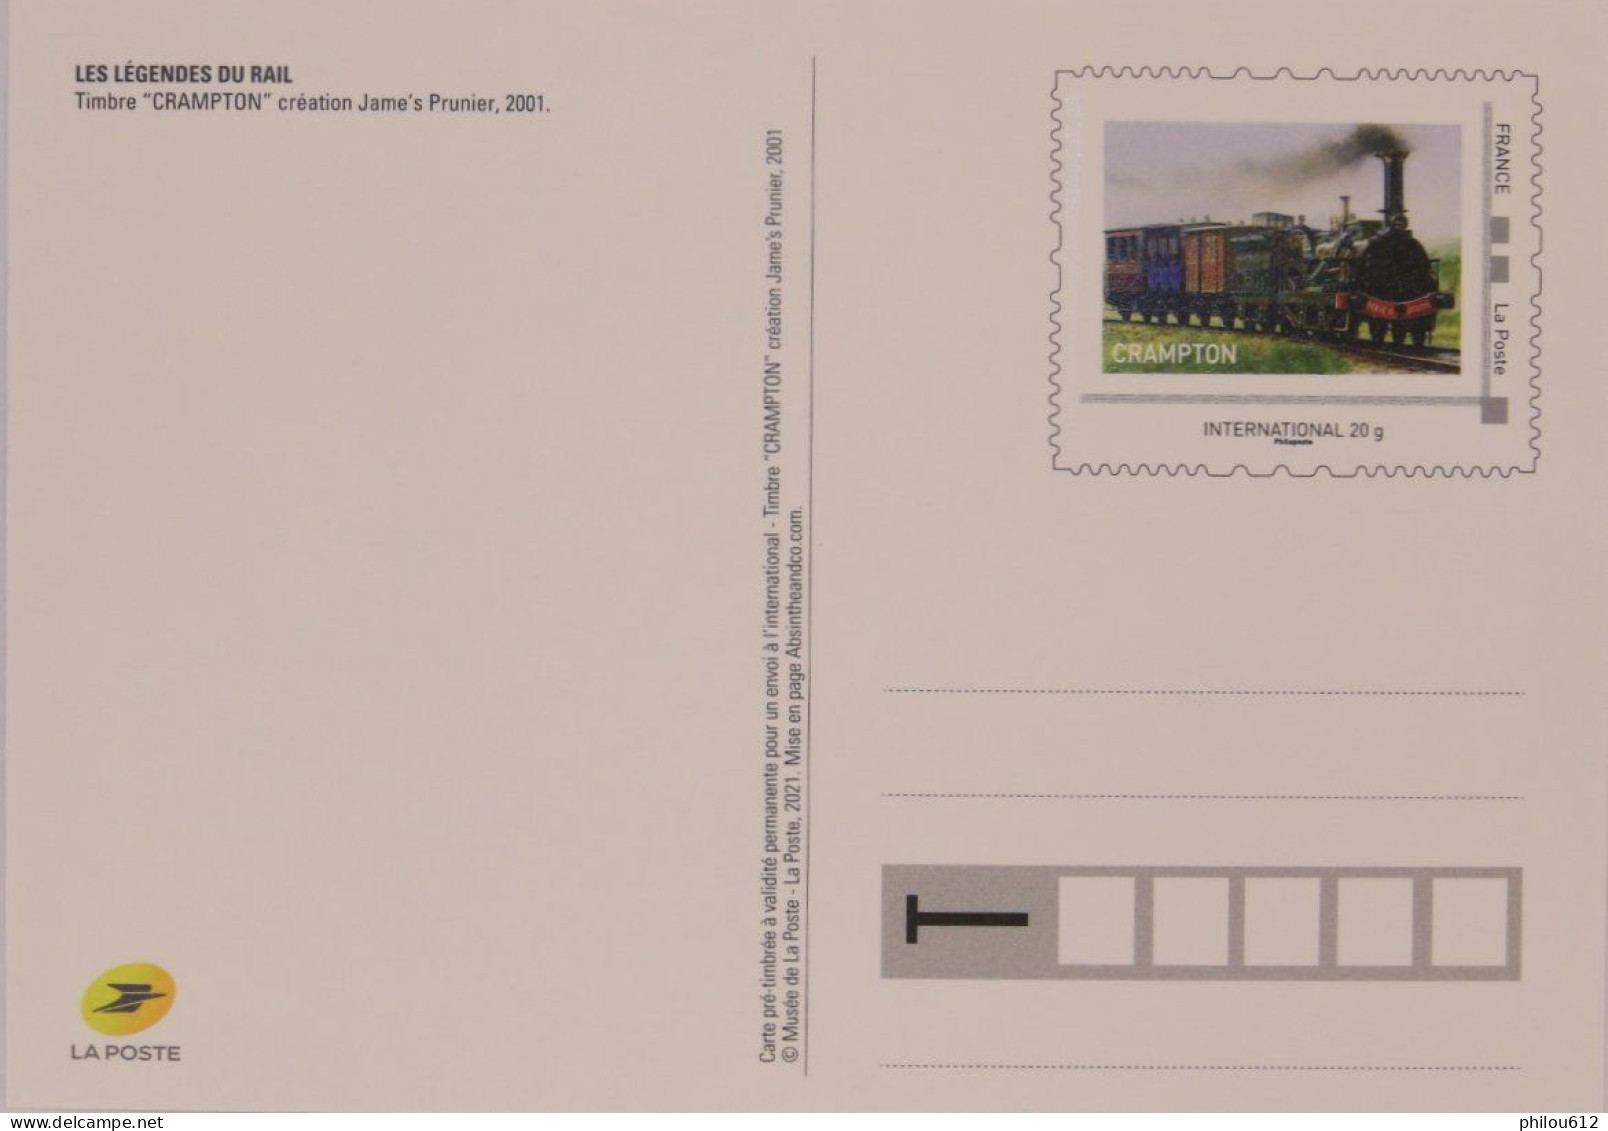 Crampton - 2021 - Prêts-à-poster:Stamped On Demand & Semi-official Overprinting (1995-...)